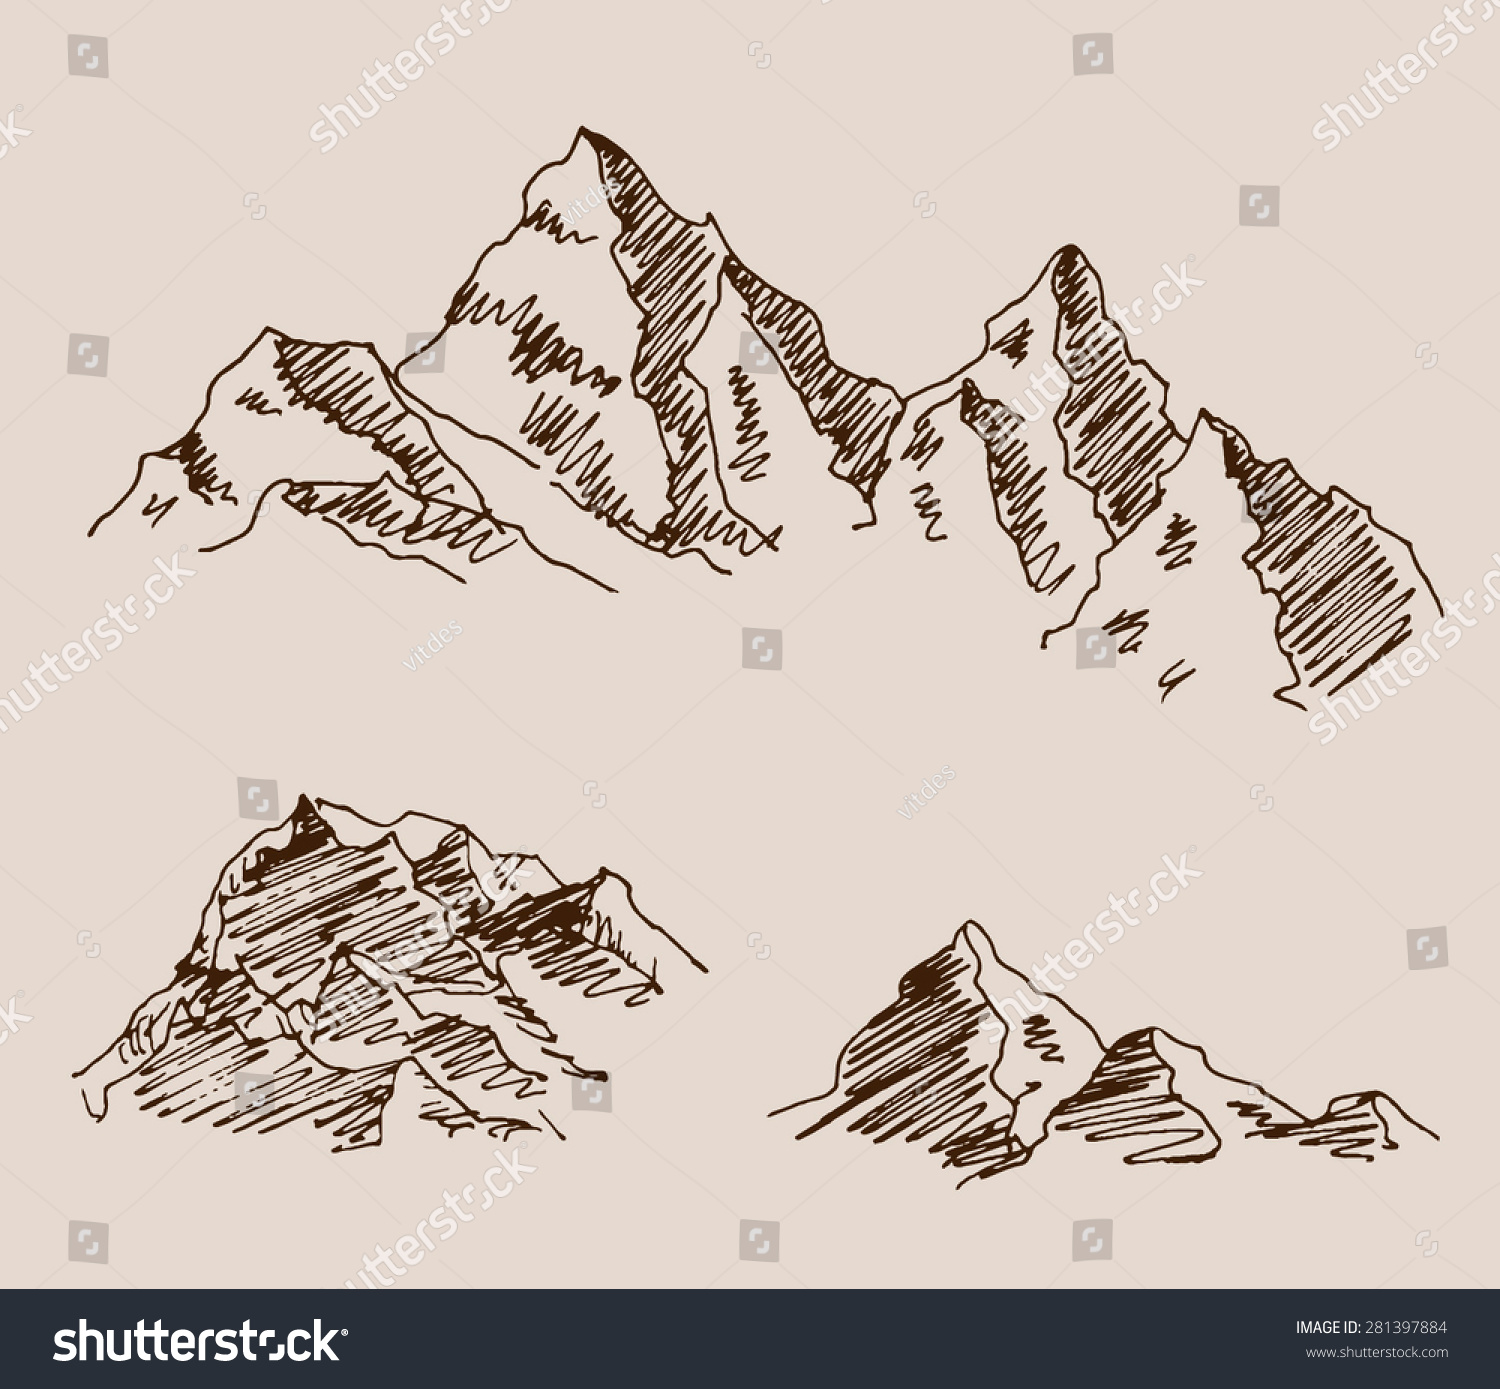 Rocky Mountain Set Engraving Etching Hand Stock Vector 281397884 ...